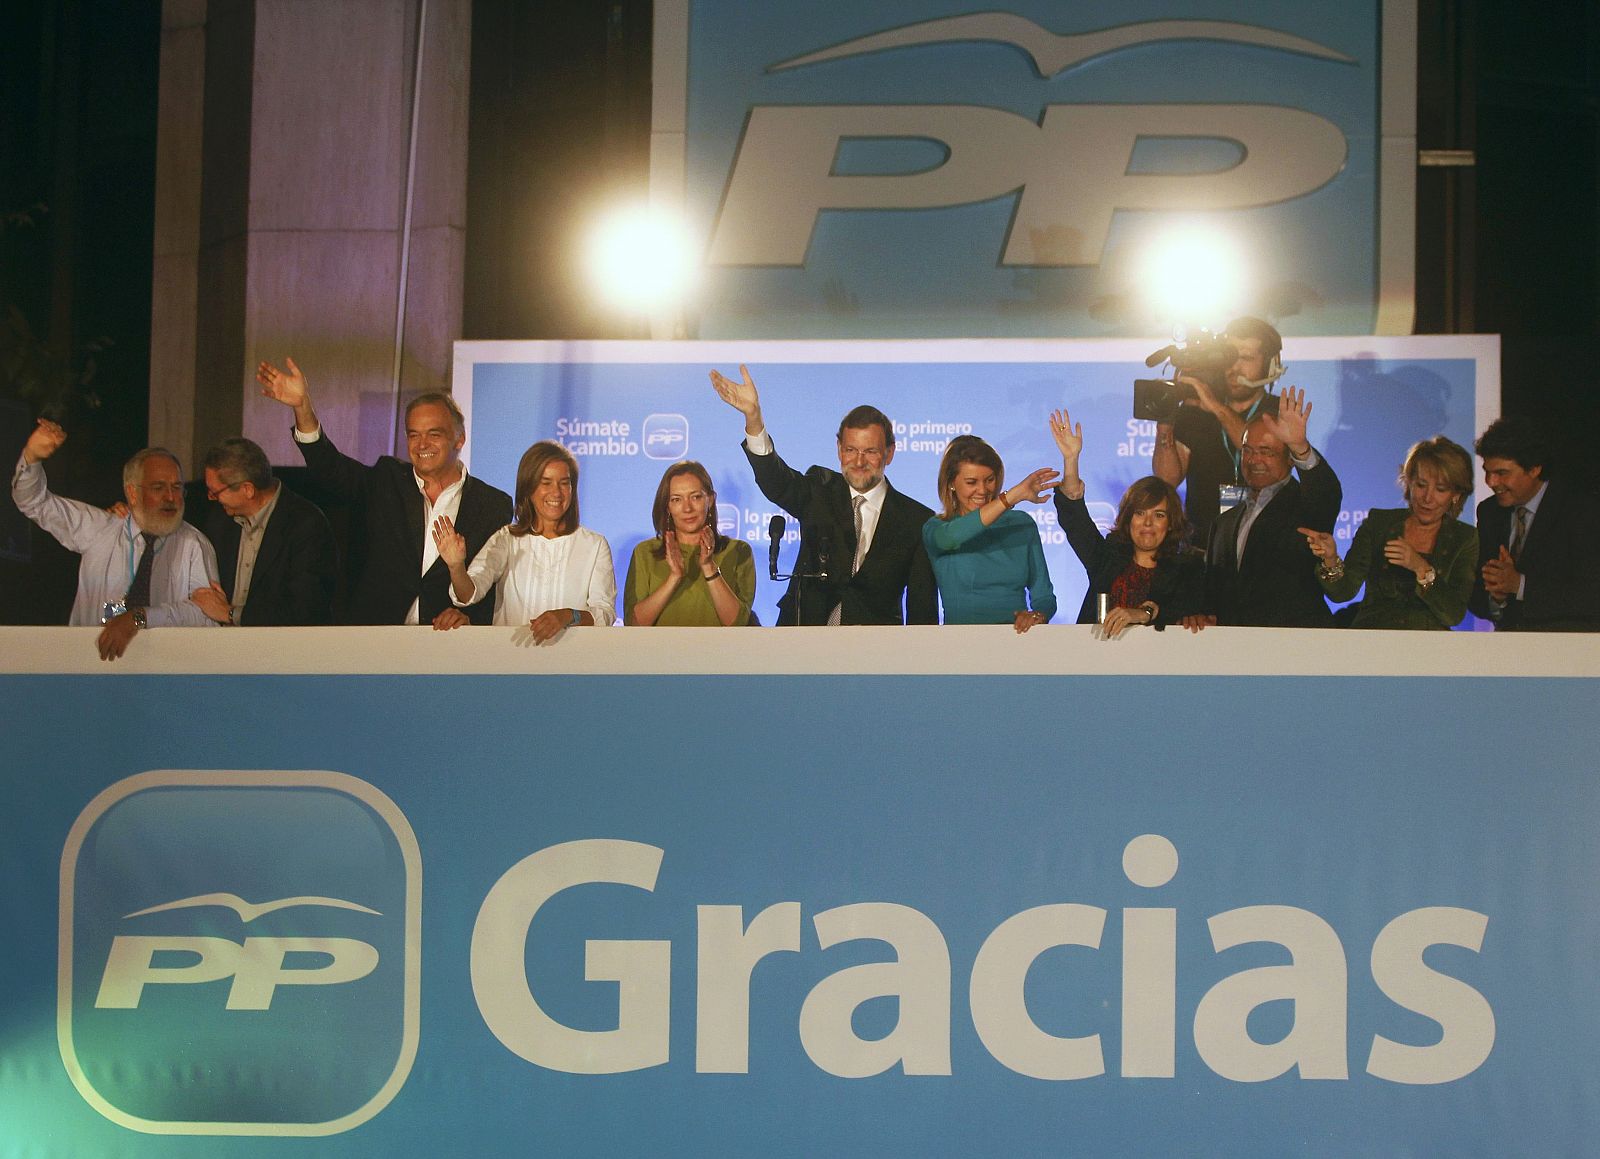 Spain's People's Party leader Rajoy acknowledges supporters next to his wife and members of his party after claiming victory in general elections in Madrid